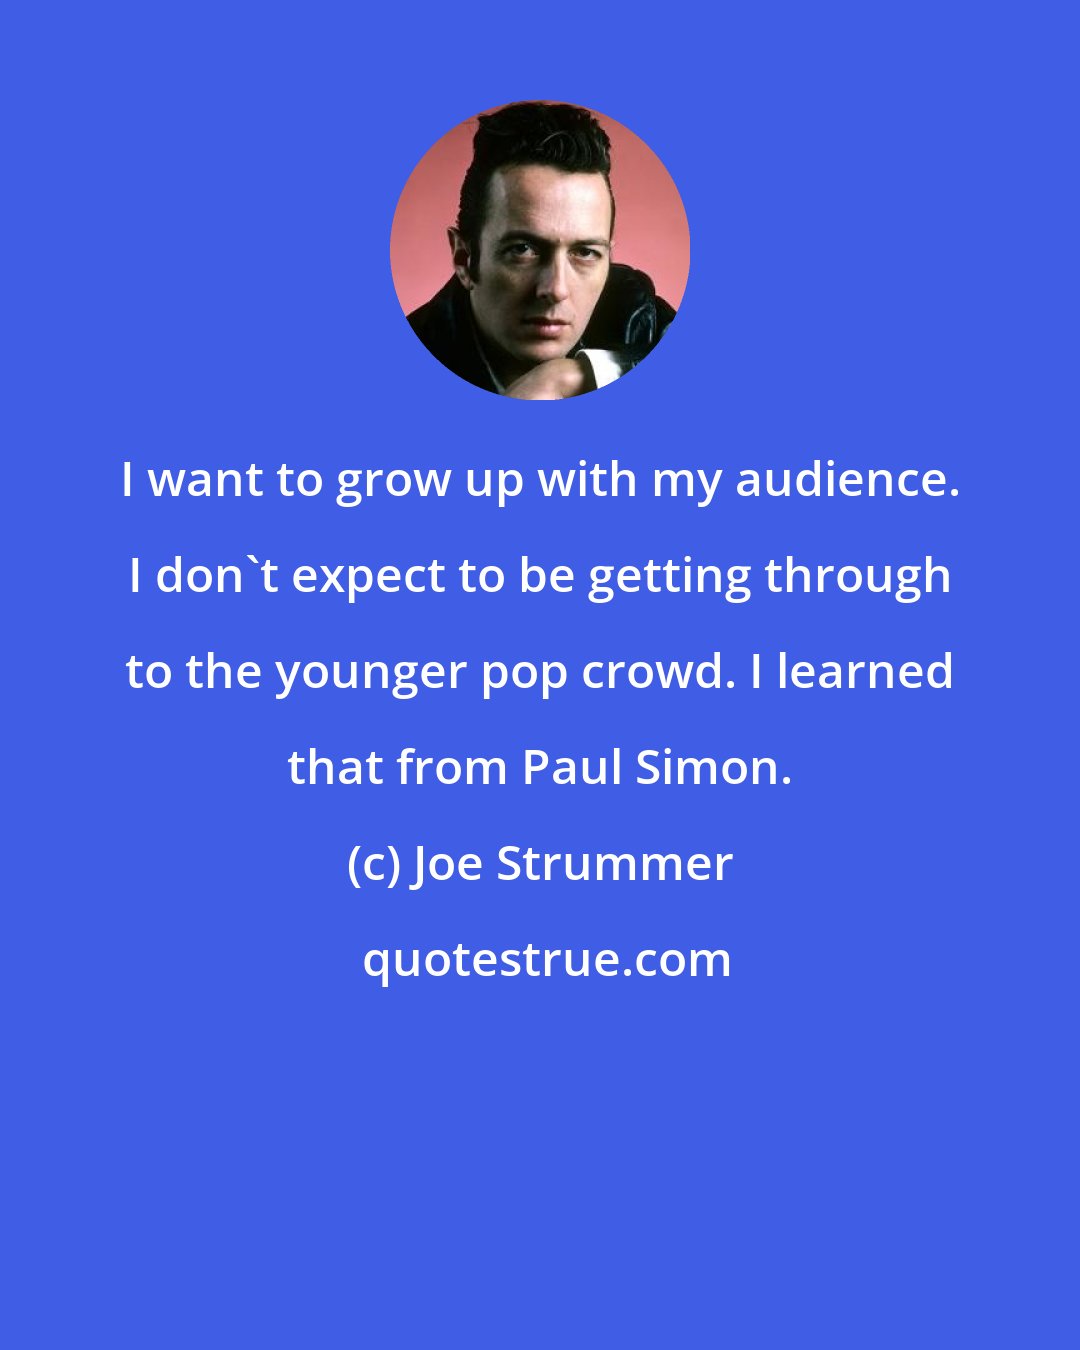 Joe Strummer: I want to grow up with my audience. I don't expect to be getting through to the younger pop crowd. I learned that from Paul Simon.